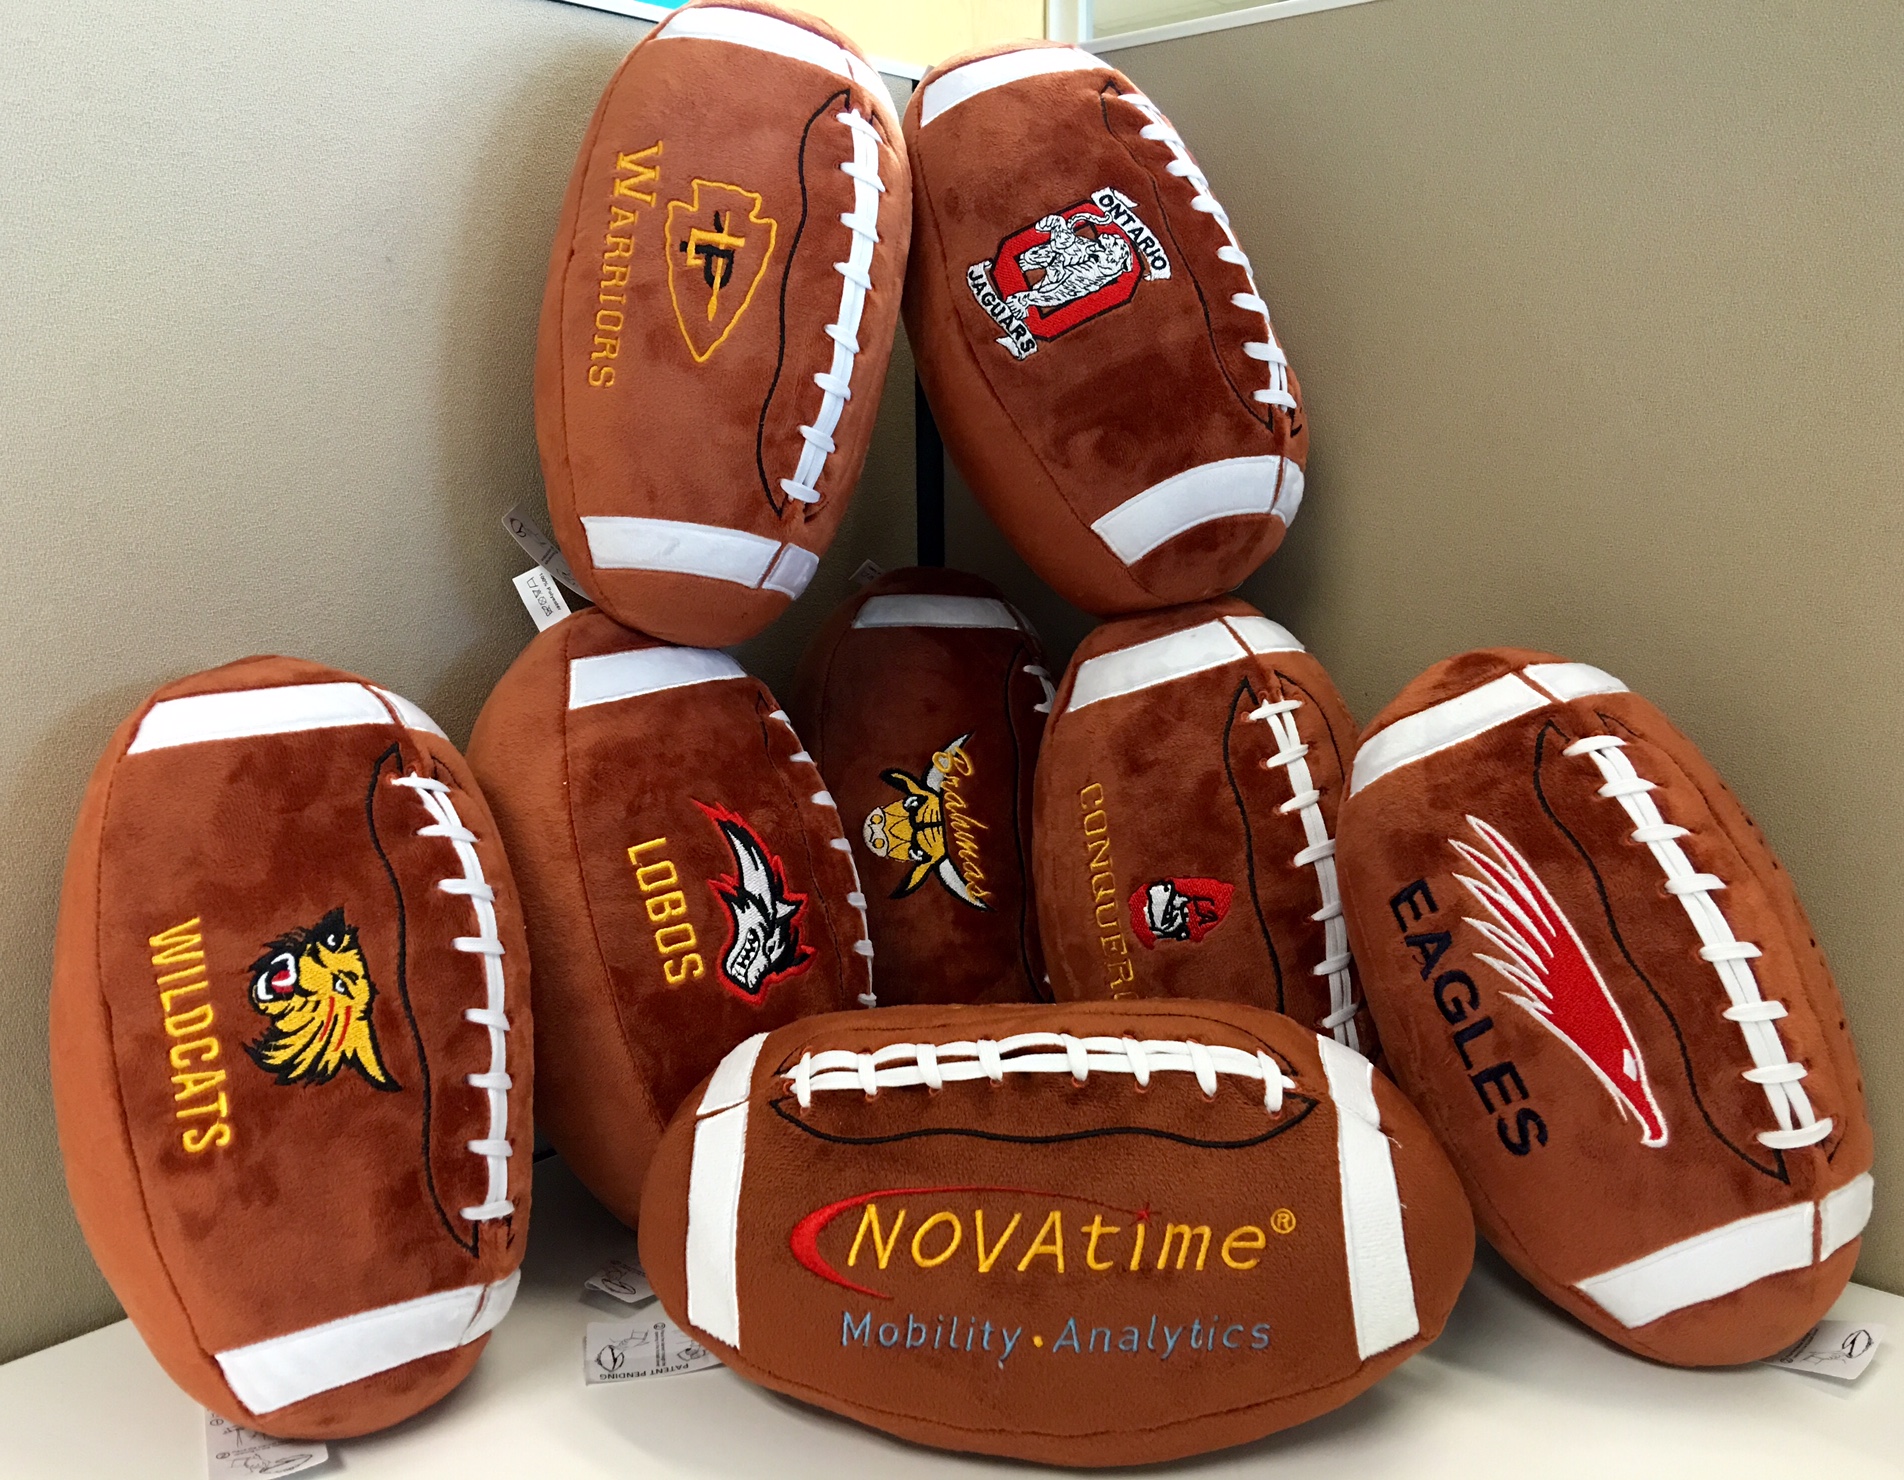 NOVAtime Donates 1,400 Football Blankets to Local High School Fundraisers